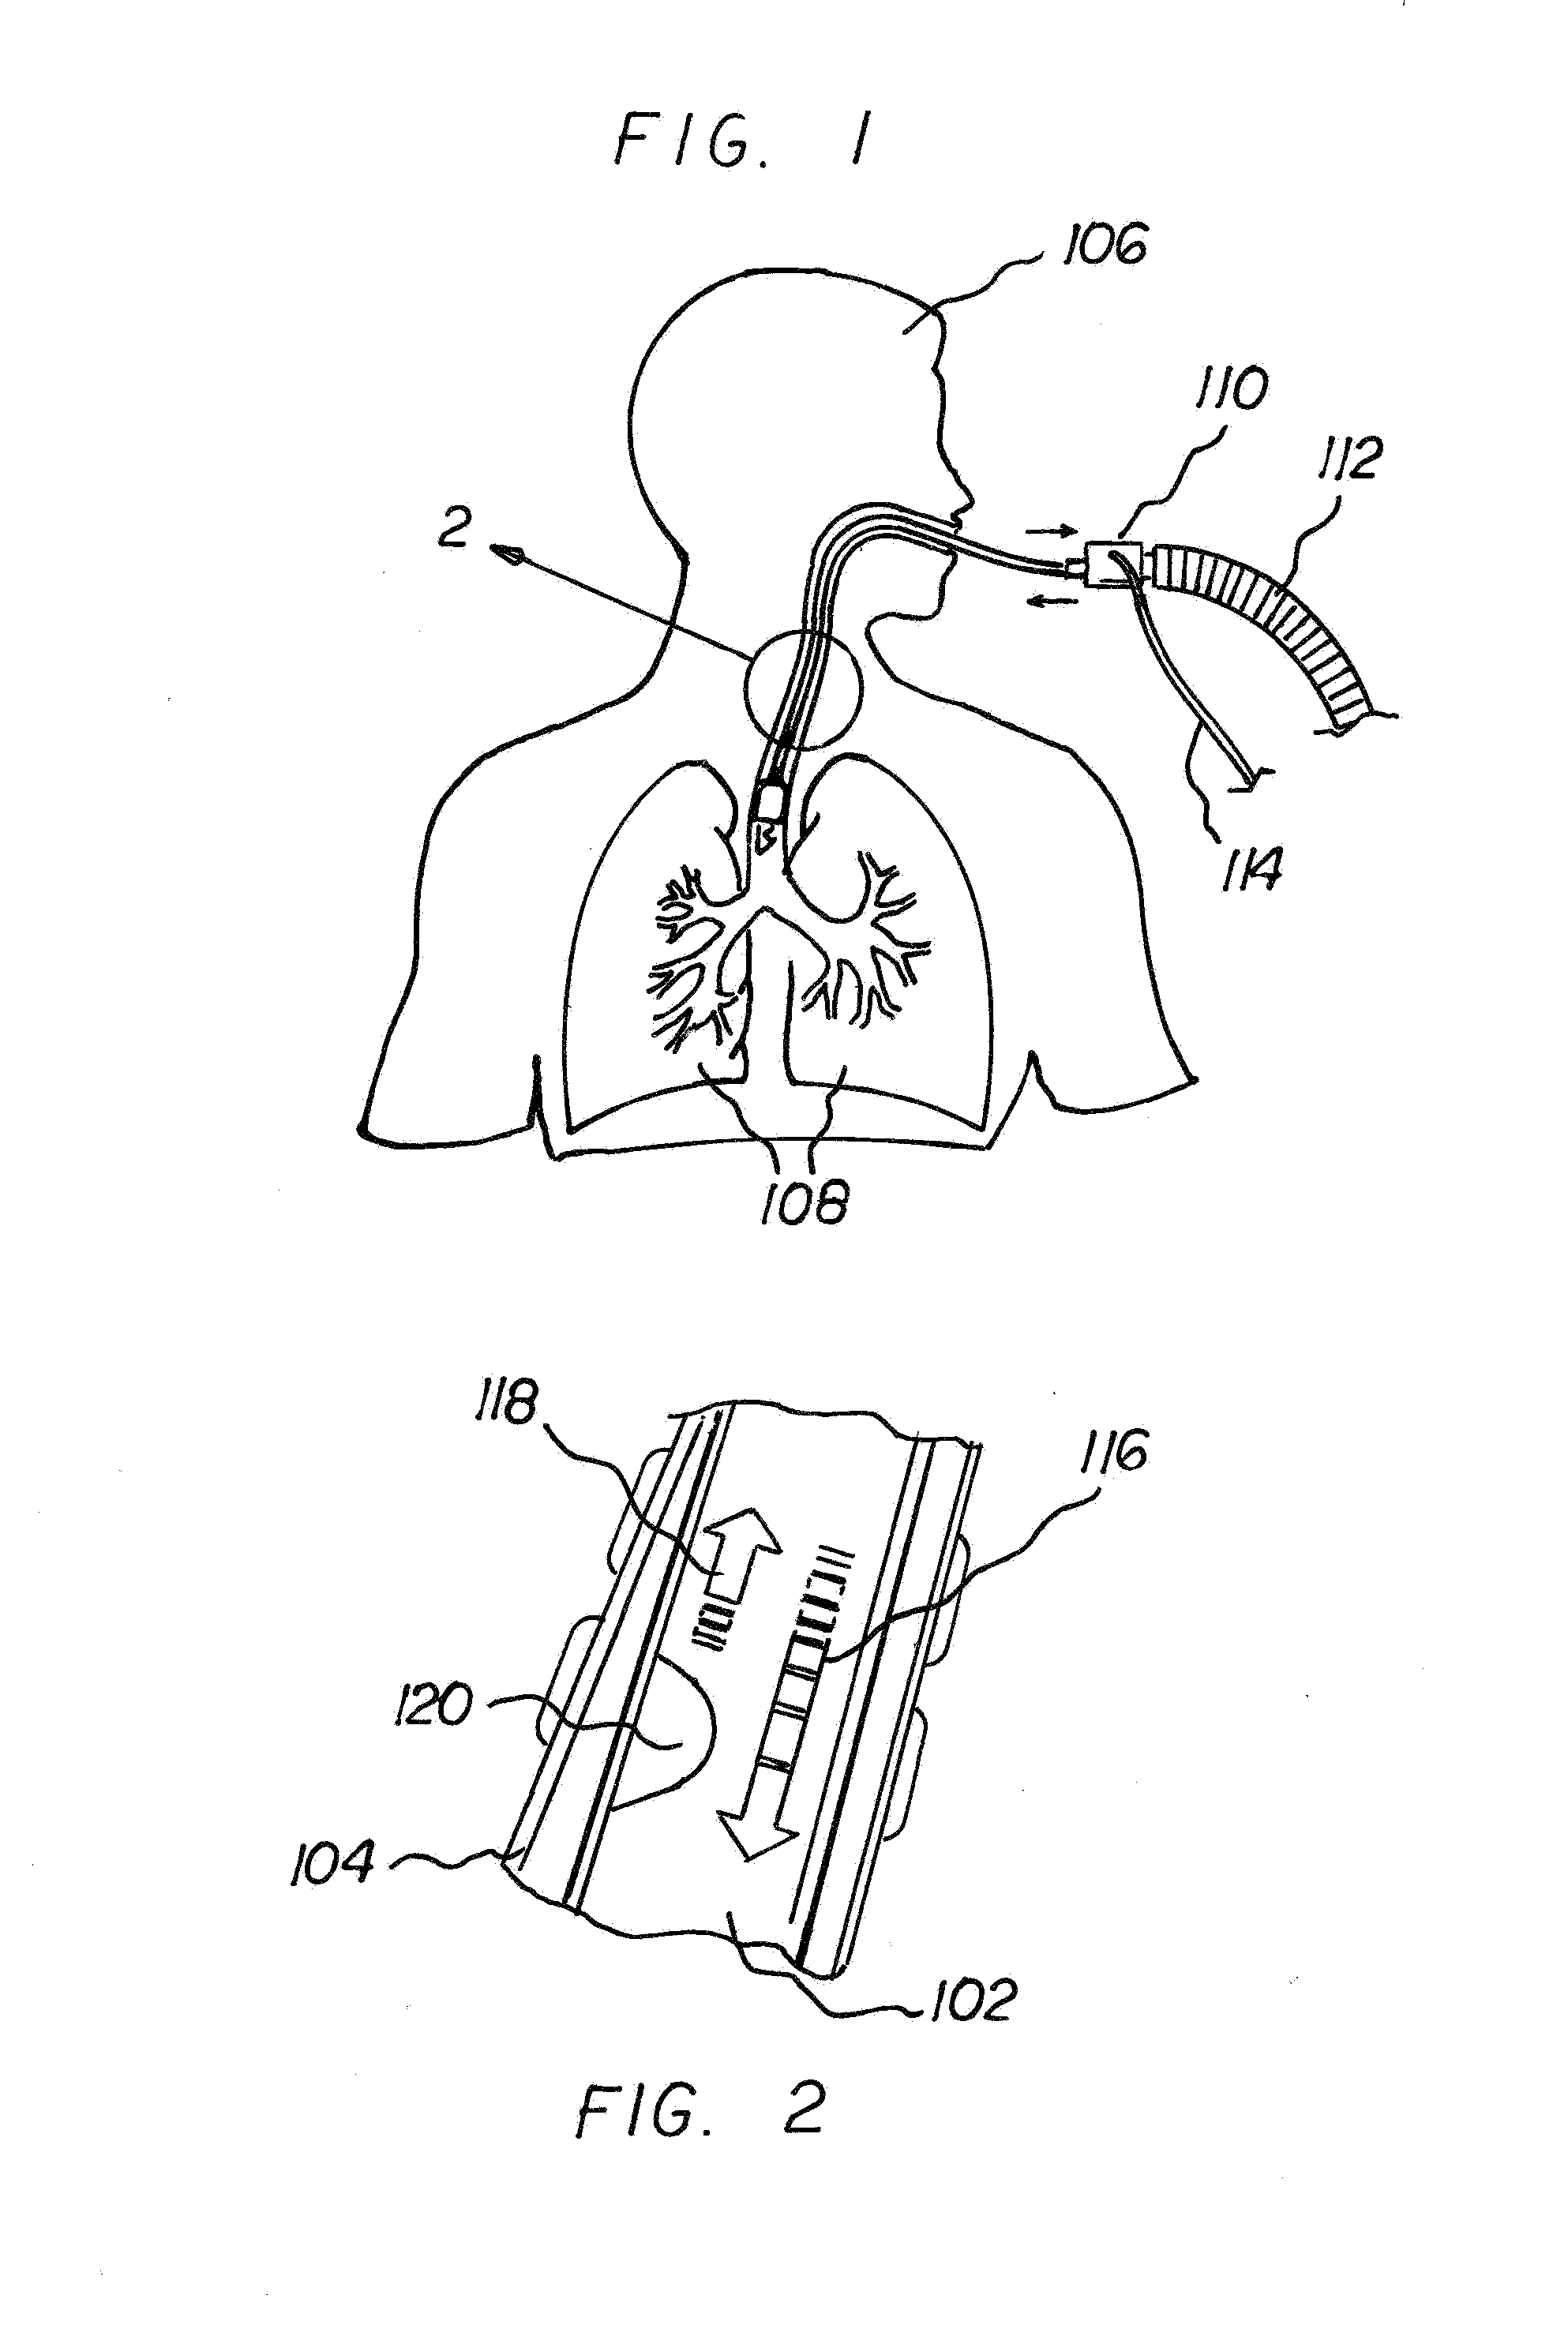 System and Method for Use of Acoustic Reflectometry Information in Ventilation Devices